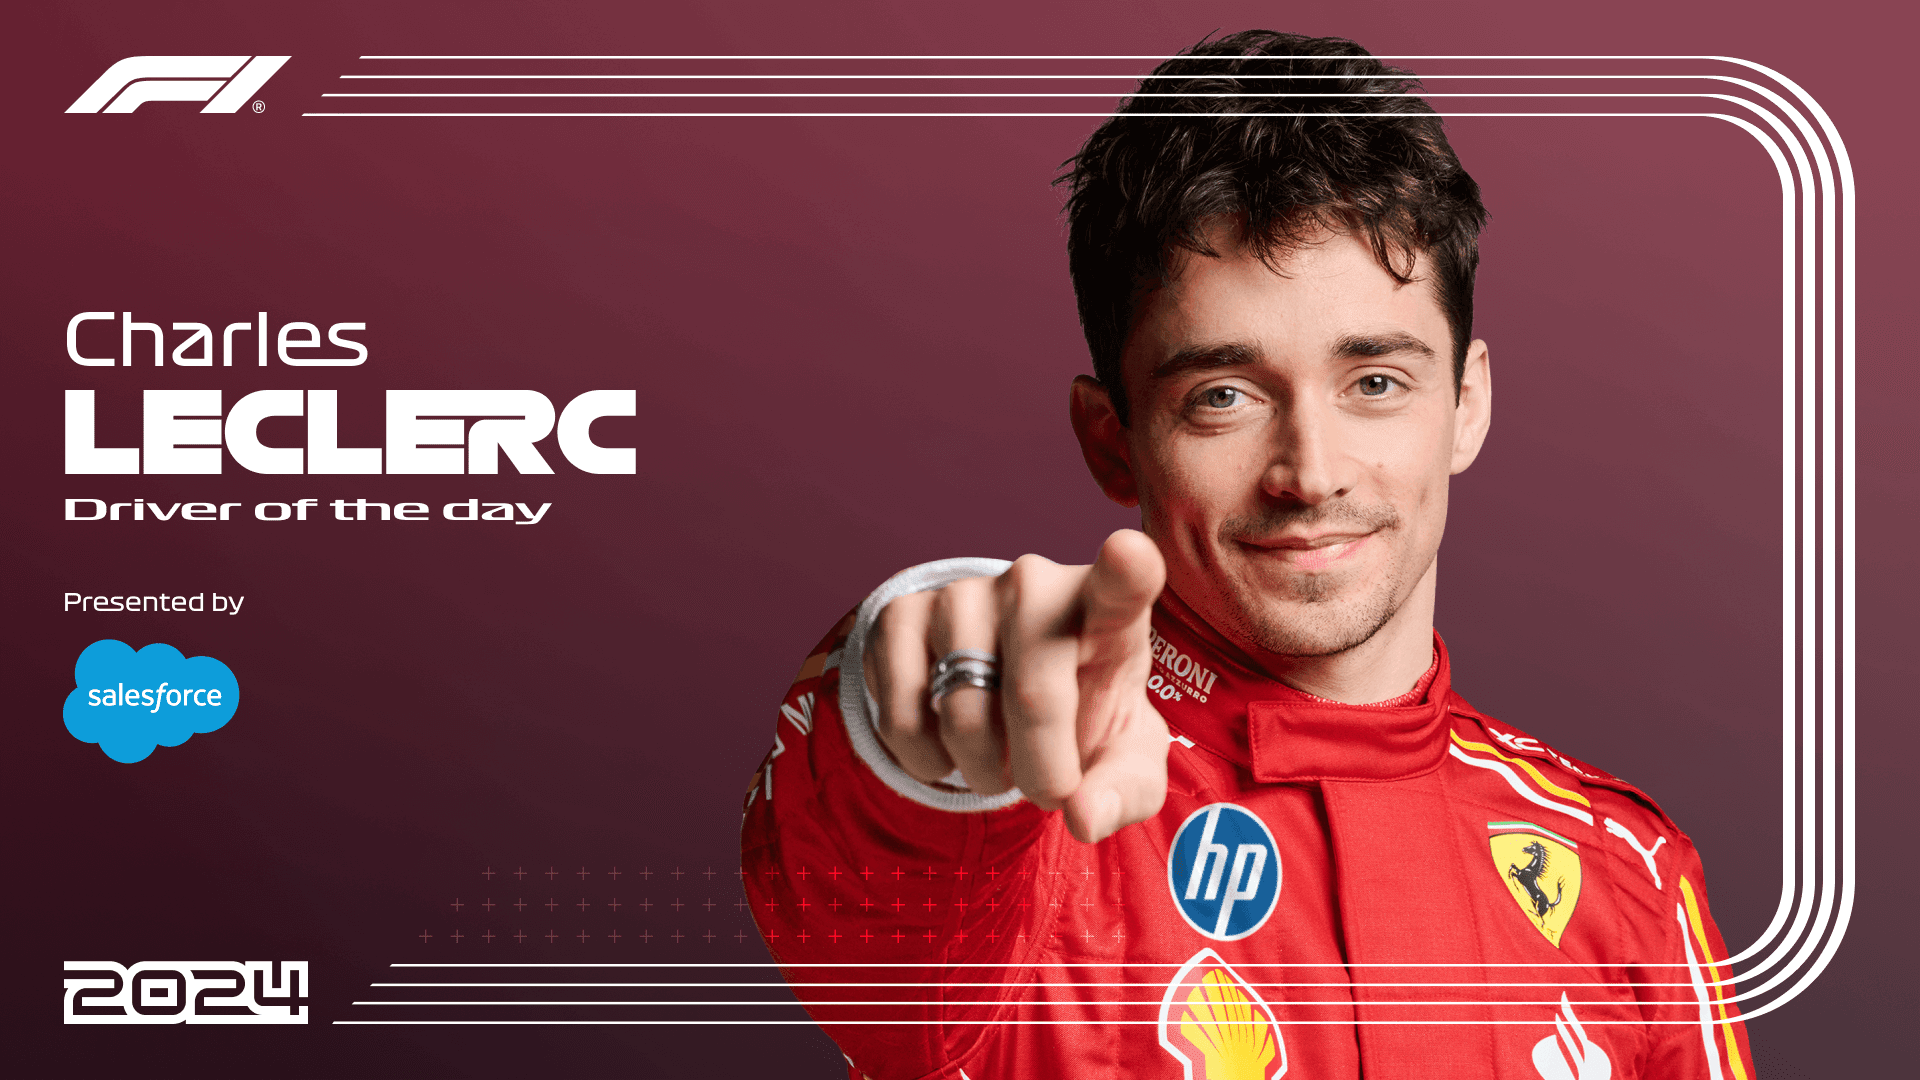 DRIVER OF THE DAY: Leclerc gets your vote after emotional home victory in Monaco